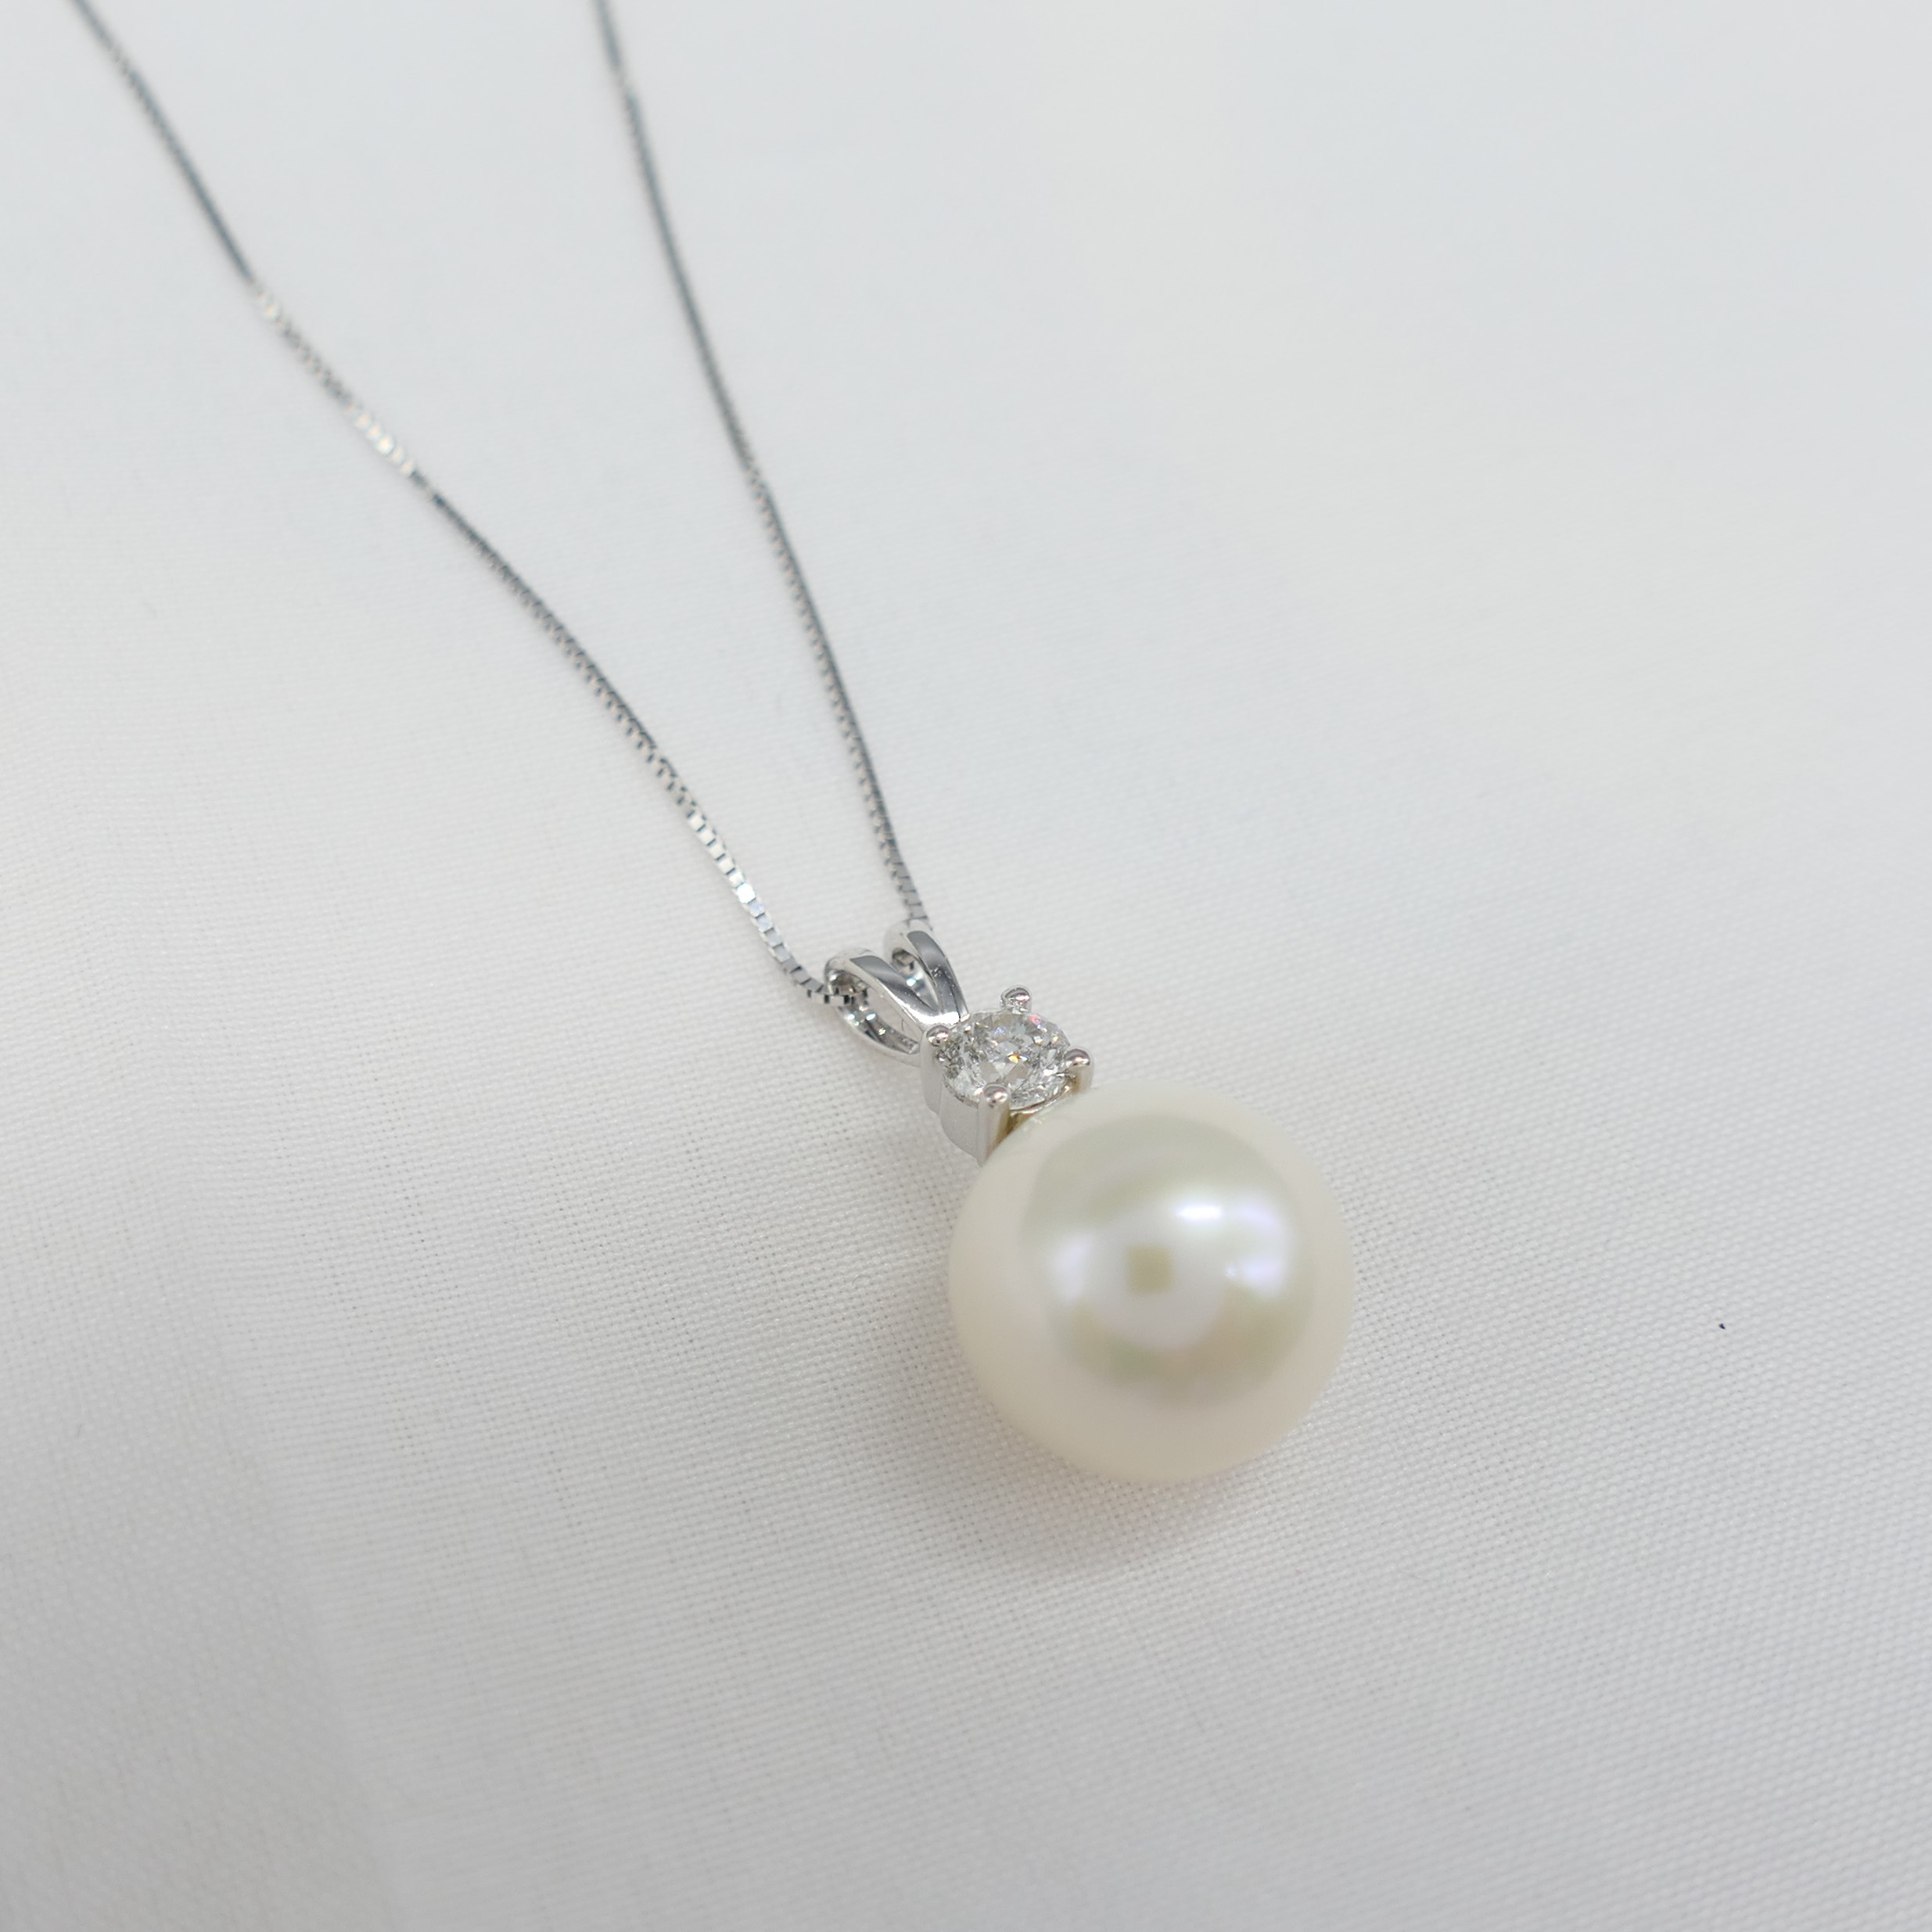 White Gold Freshwater Pearl and Diamond Necklace - Image 4 of 6